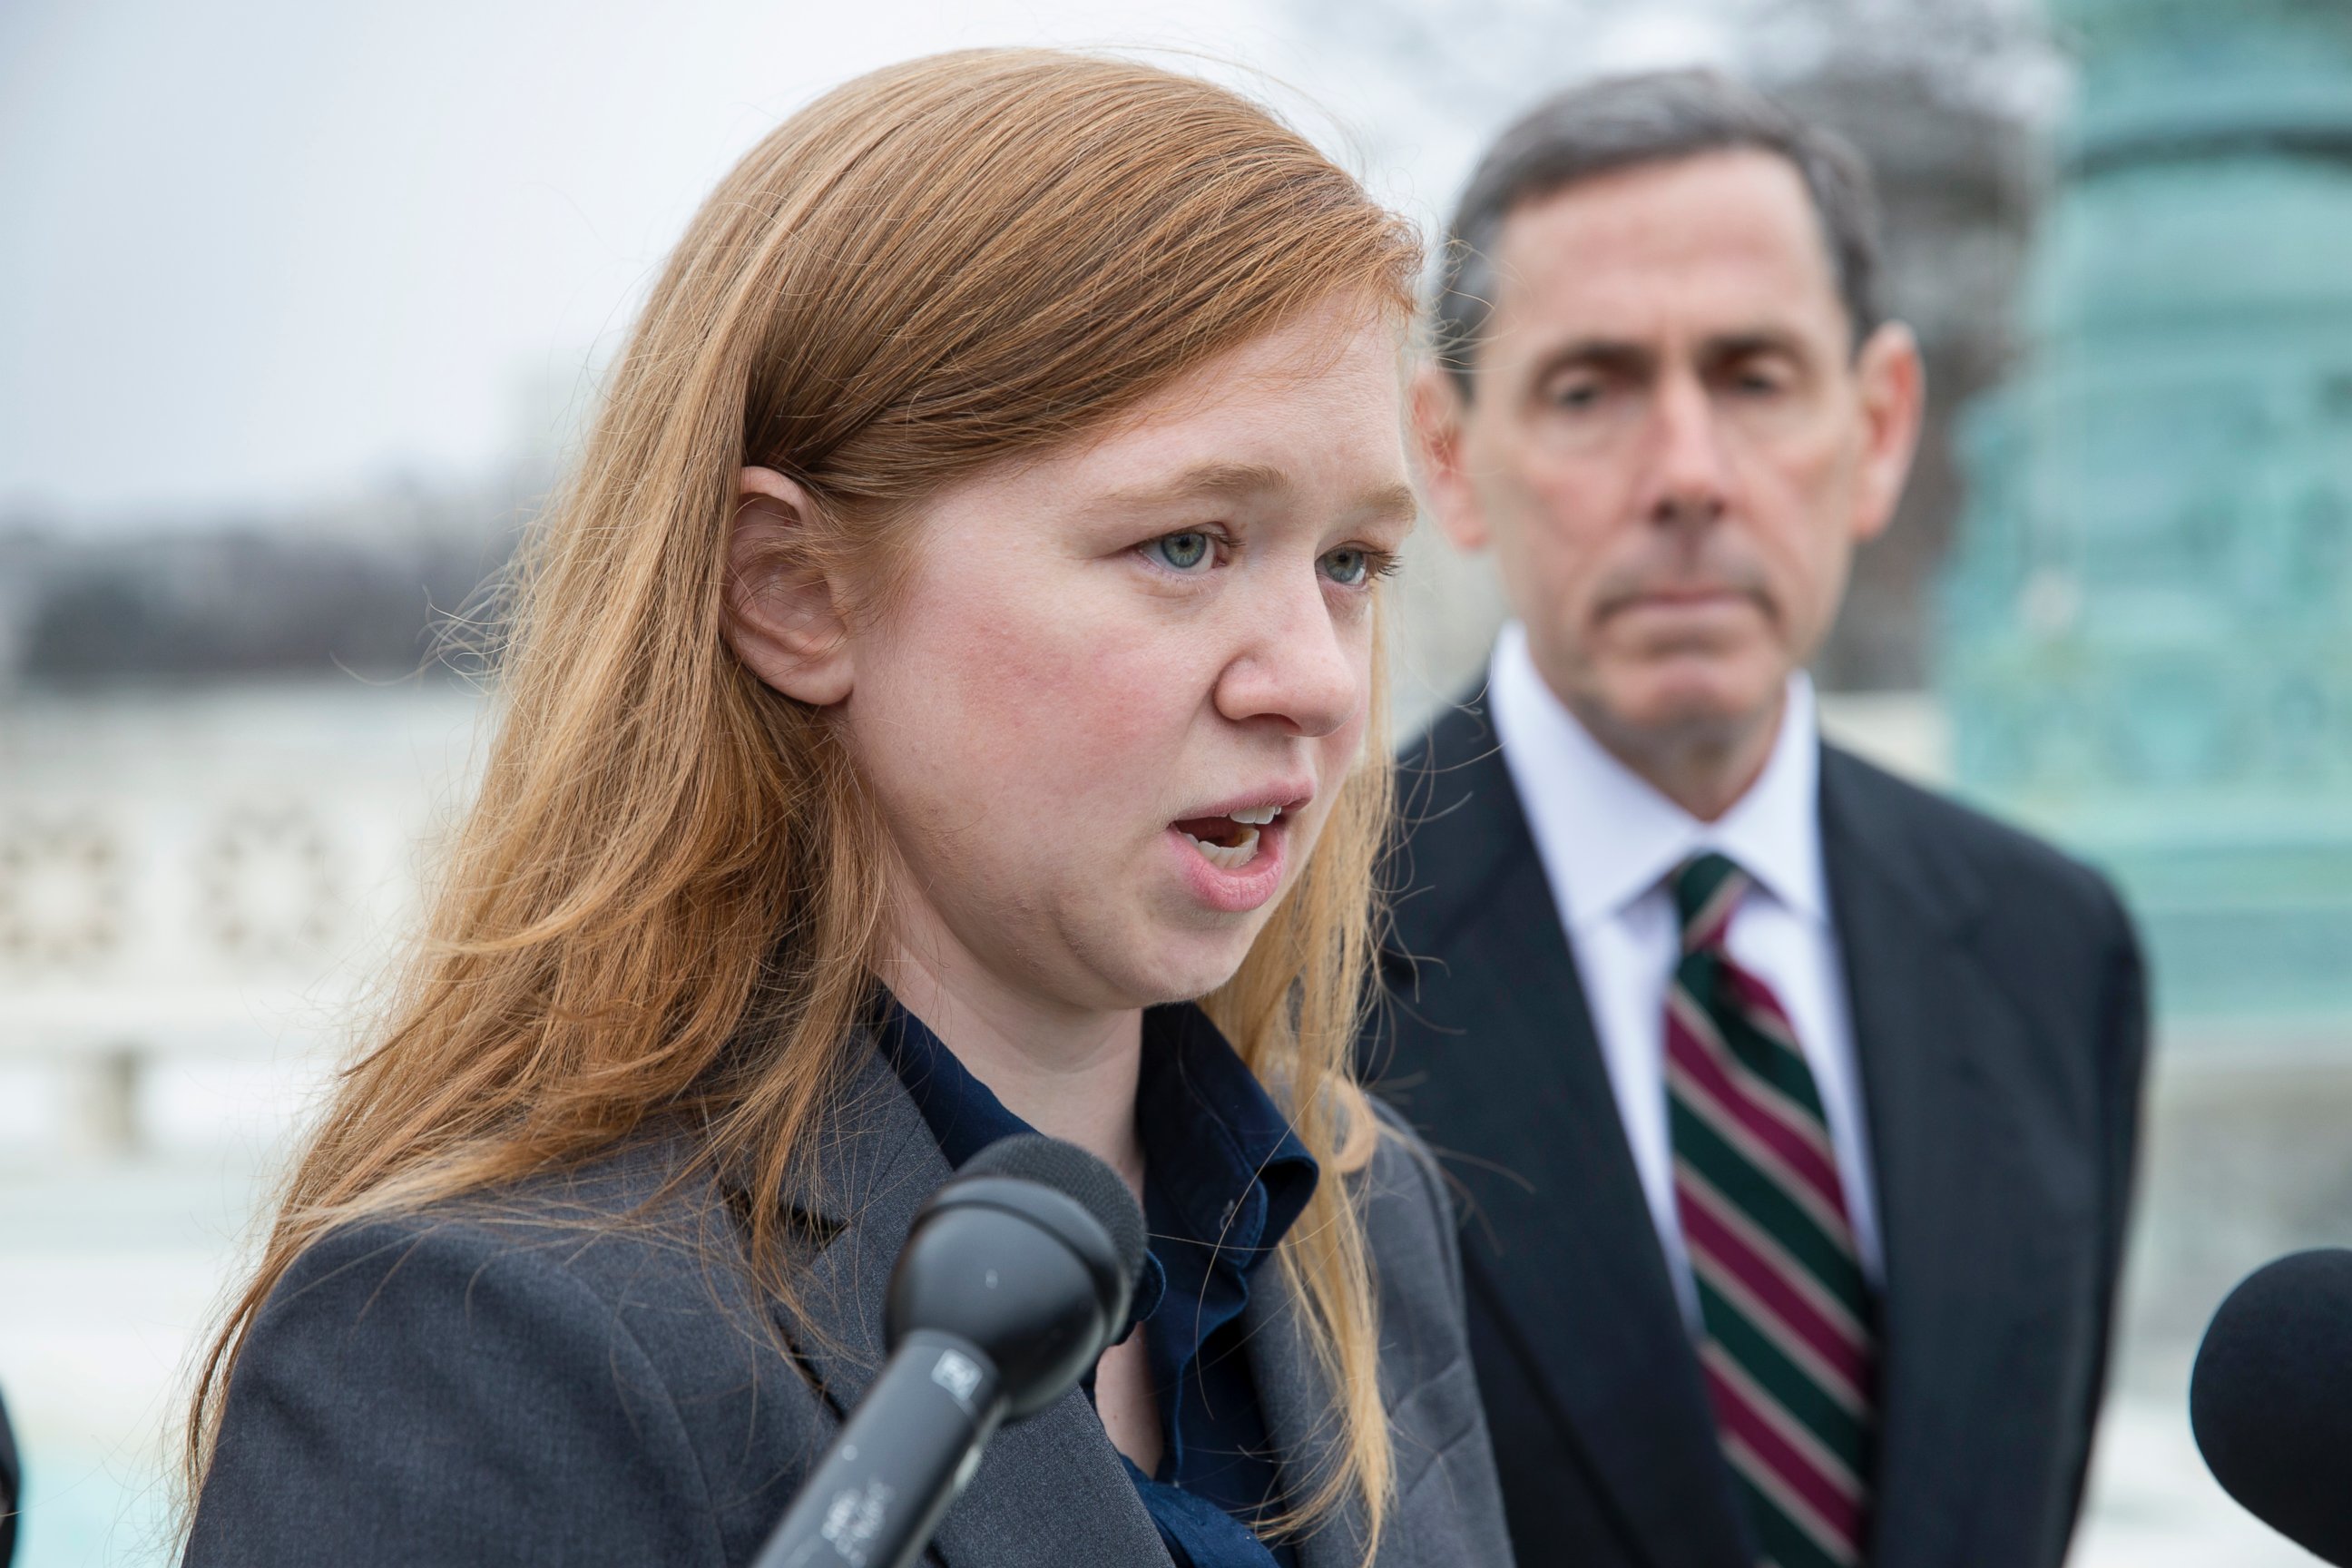 PHOTO: Abigail Fisher, who challenged the use of race in college admissions, joined by lawyer Edward Blum, right, speaks to reporters outside the Supreme Court in Washington, Dec. 9, 2015.